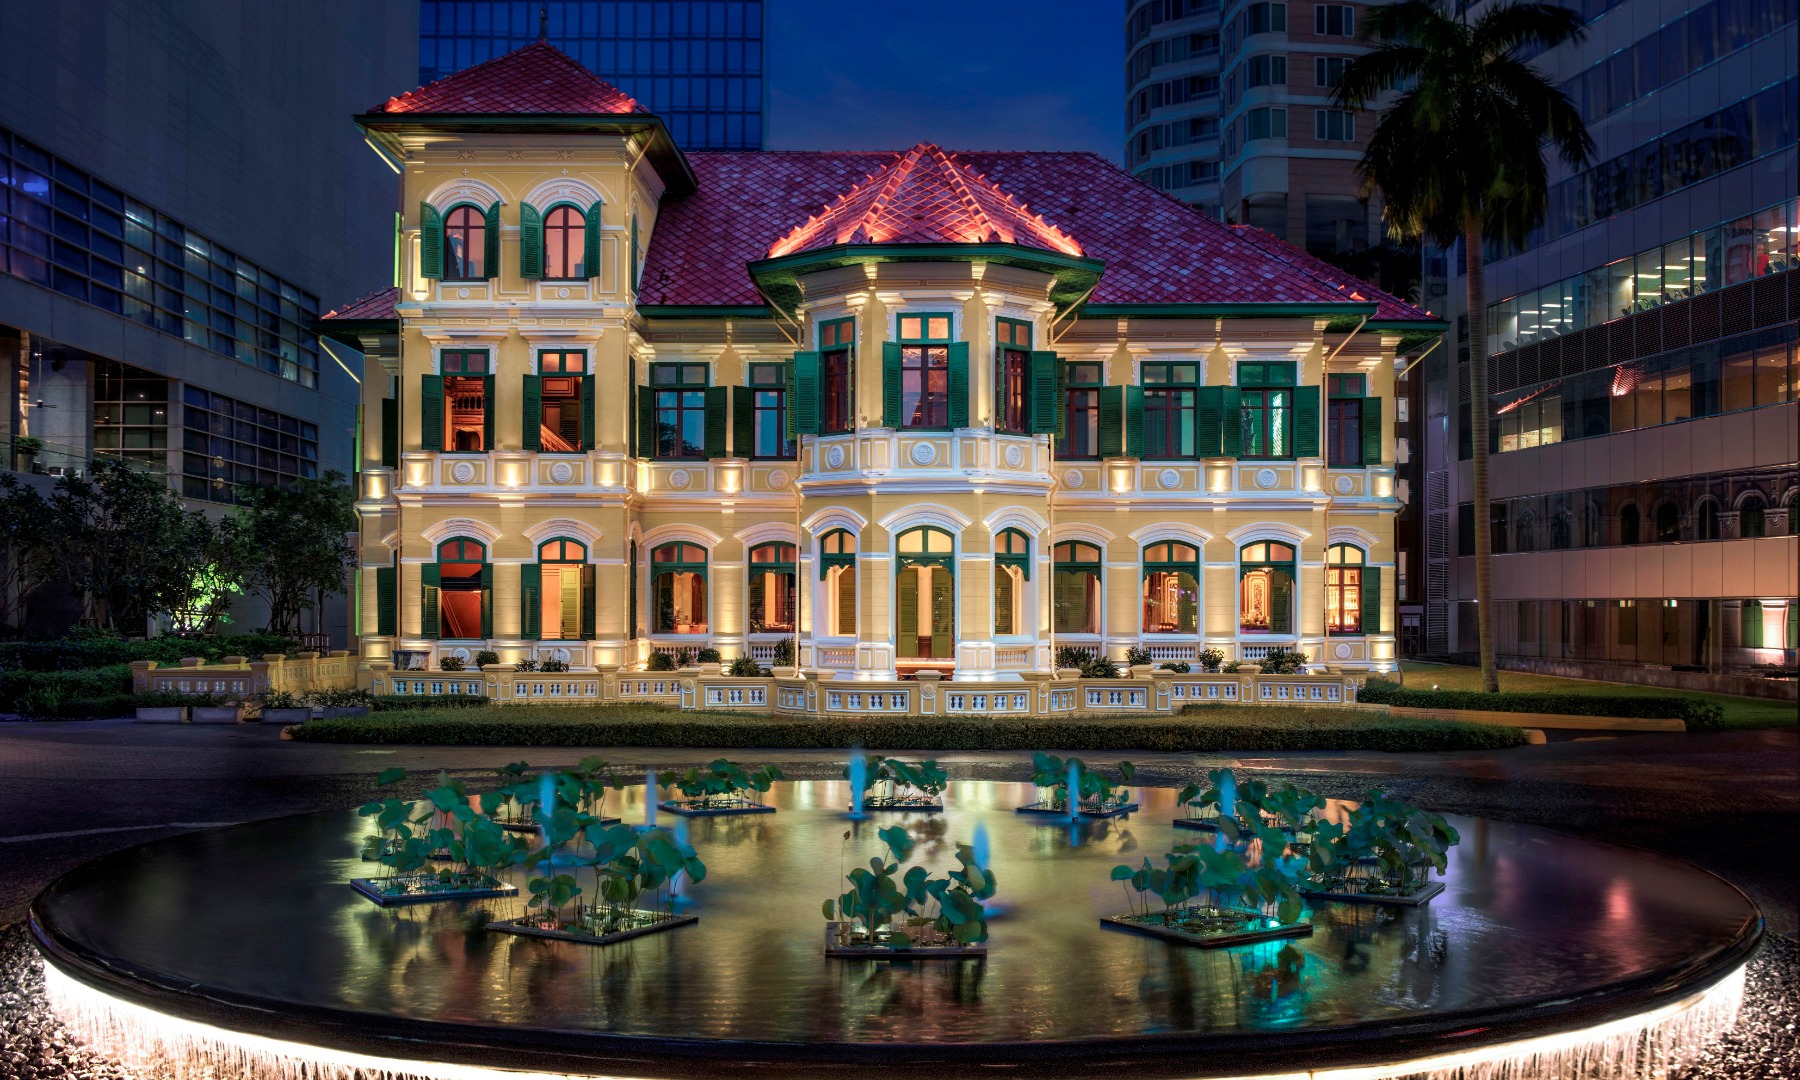 See the famous Paii at The House on Sathorn and its traditional open air gardens